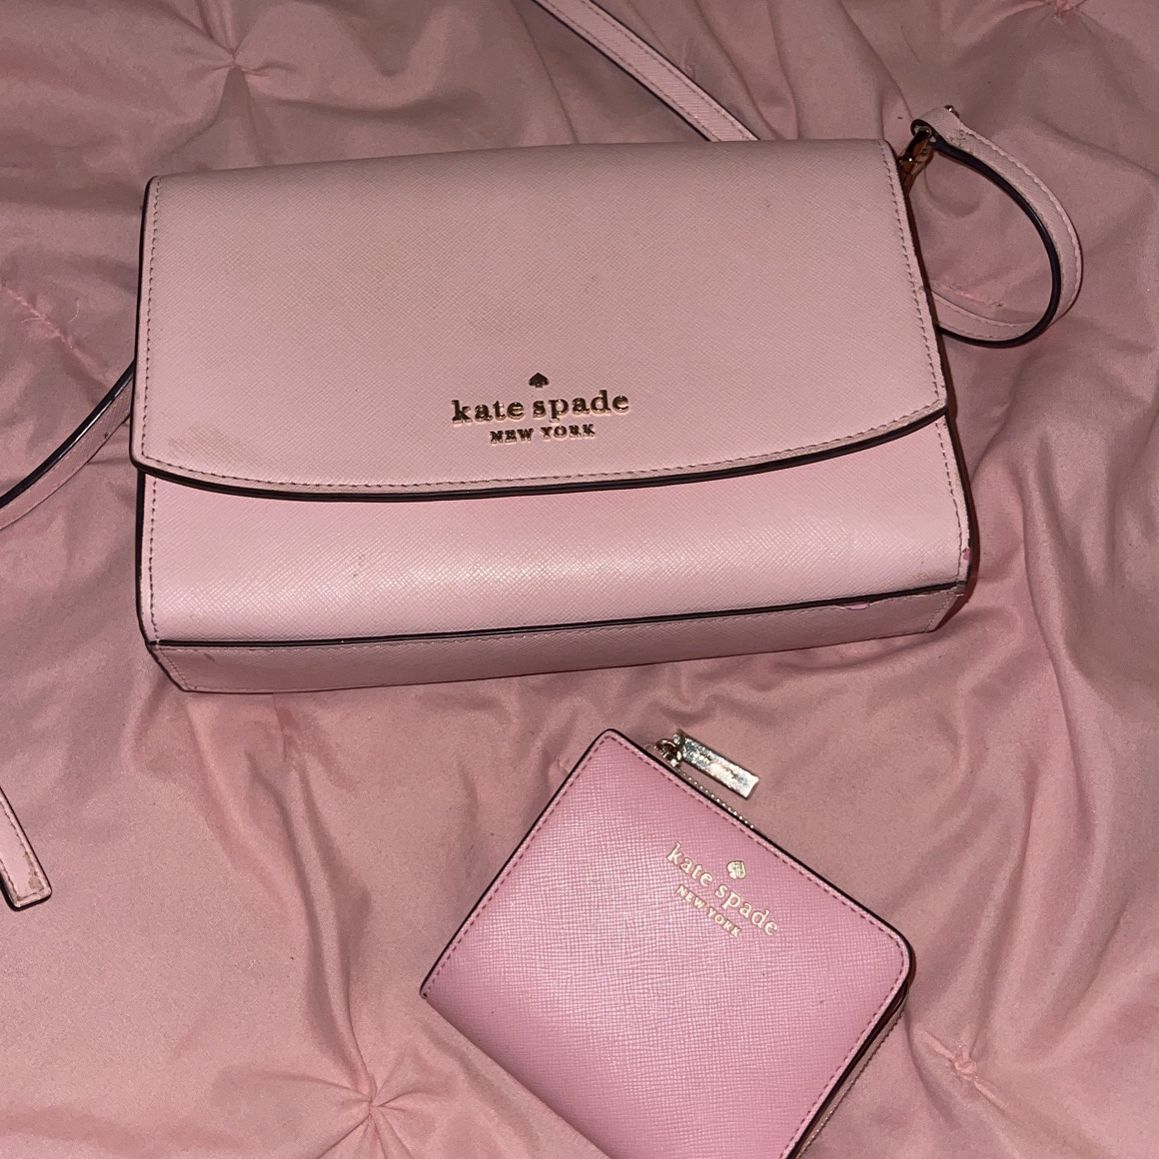 Kate spade wallet and Purse